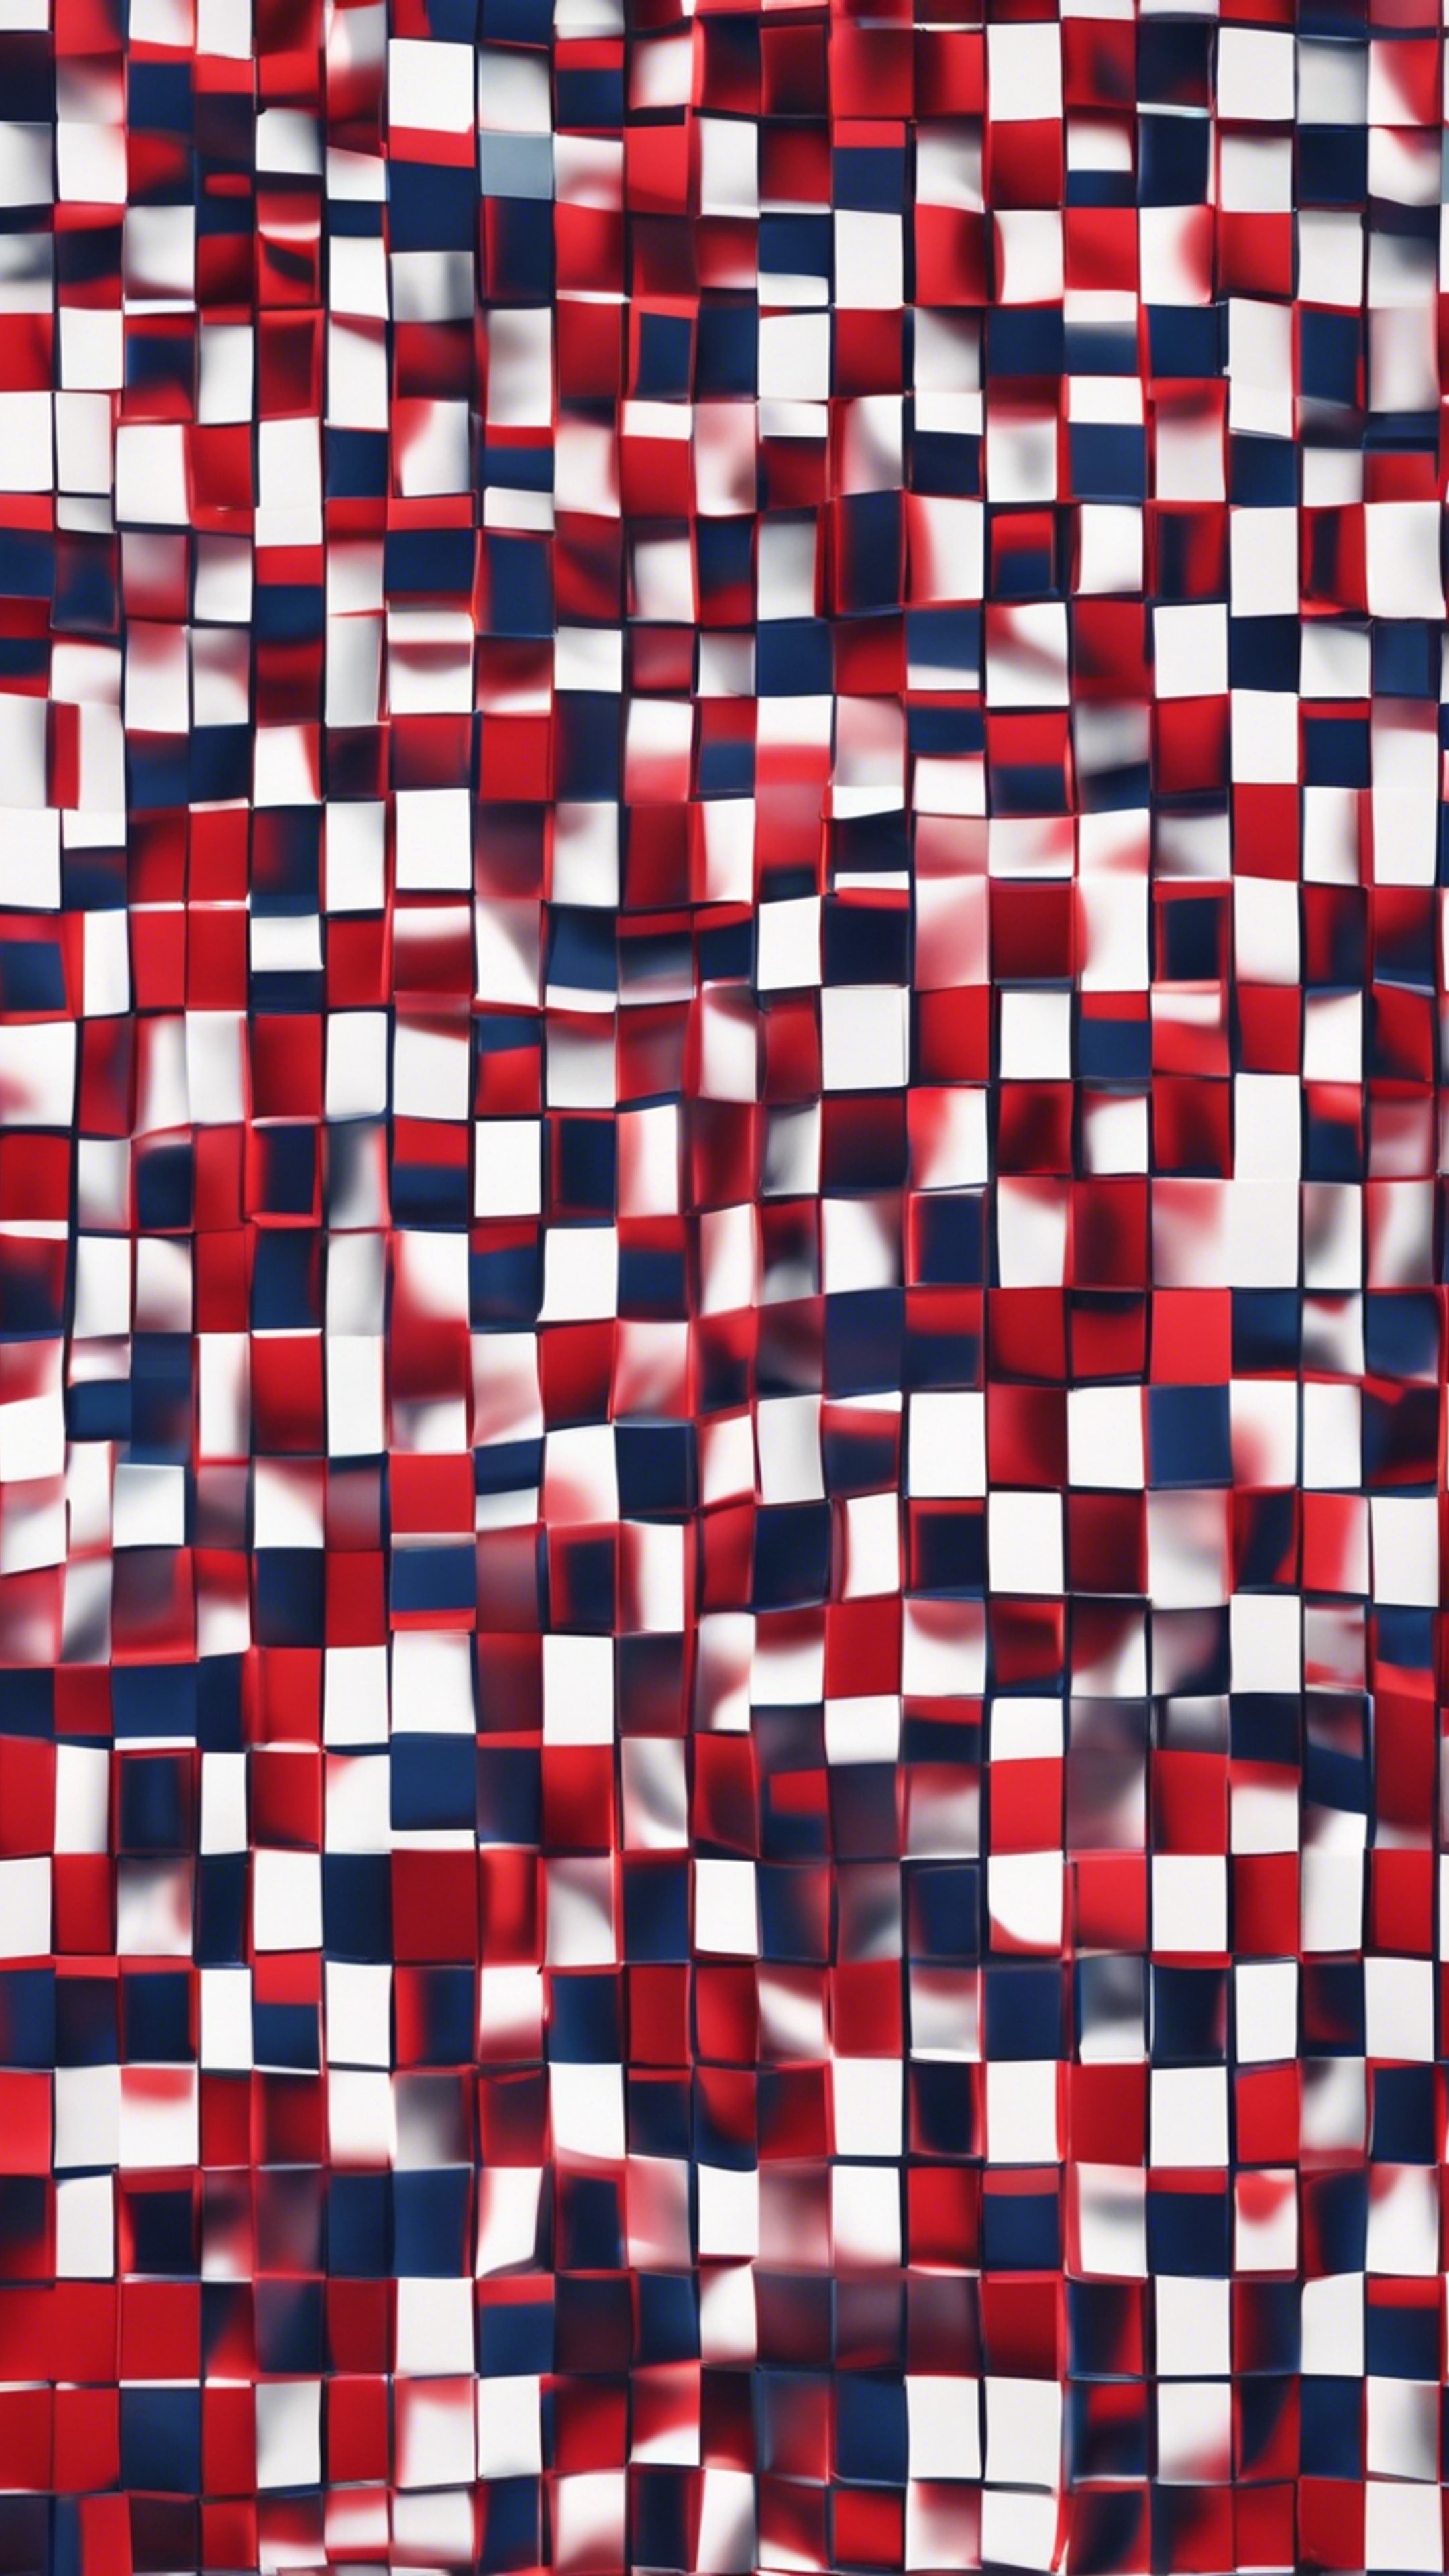 Interwoven network of red and navy squares for a checkered pattern.壁紙[77e778d16adf489588ab]